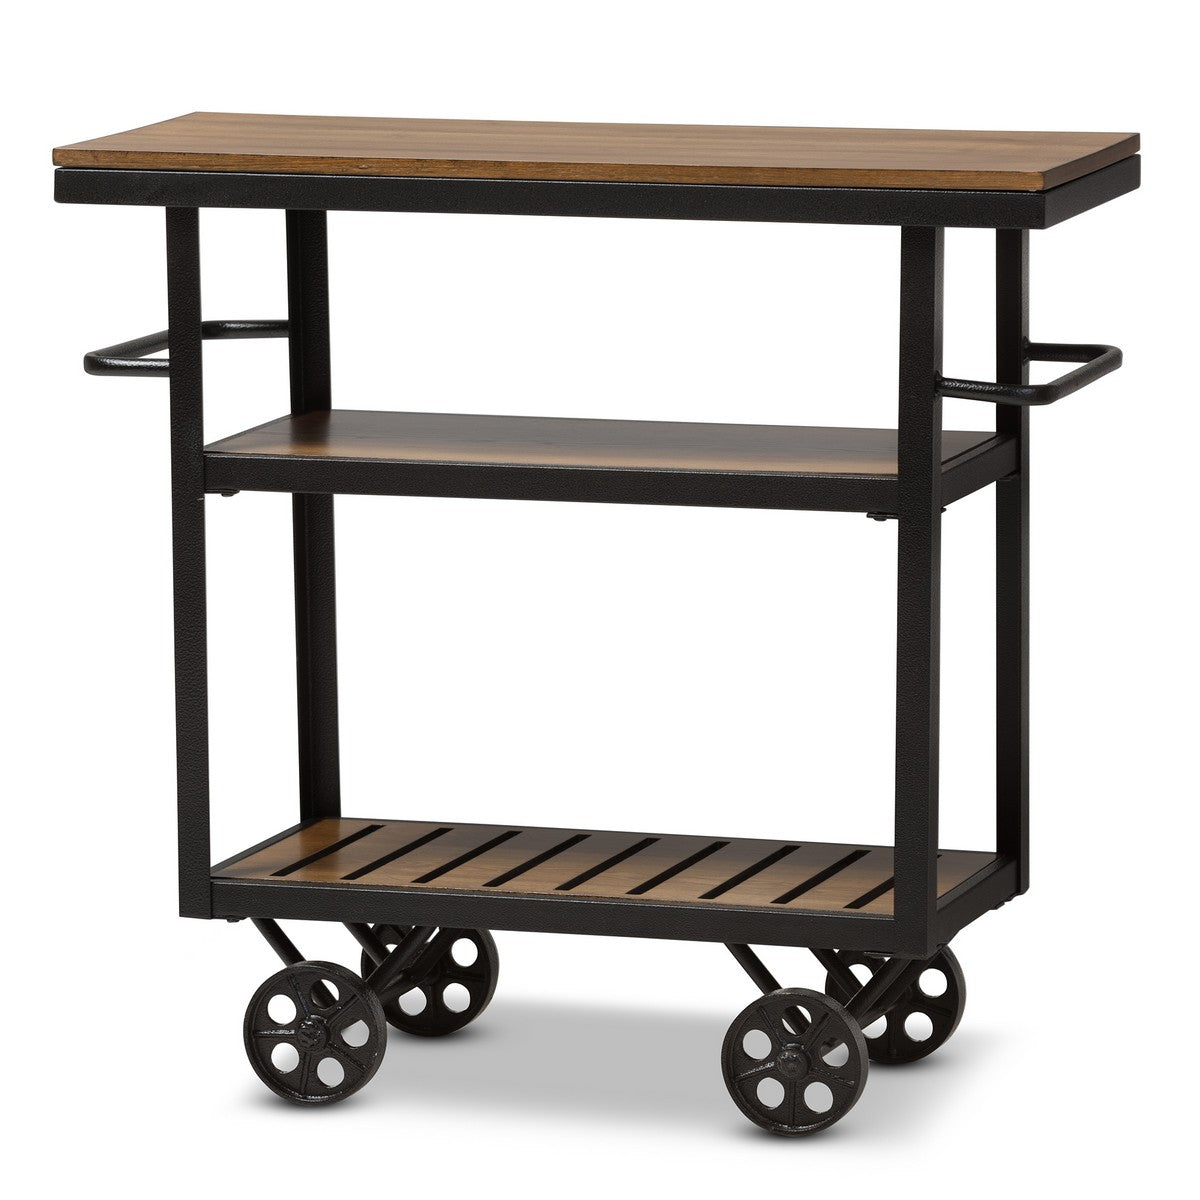 Baxton Studio Kennedy Rustic Industrial Style Antique Black Textured Finished Metal Distressed Wood Mobile Serving Cart Baxton Studio-Trolleys and Carts-Minimal And Modern - 1